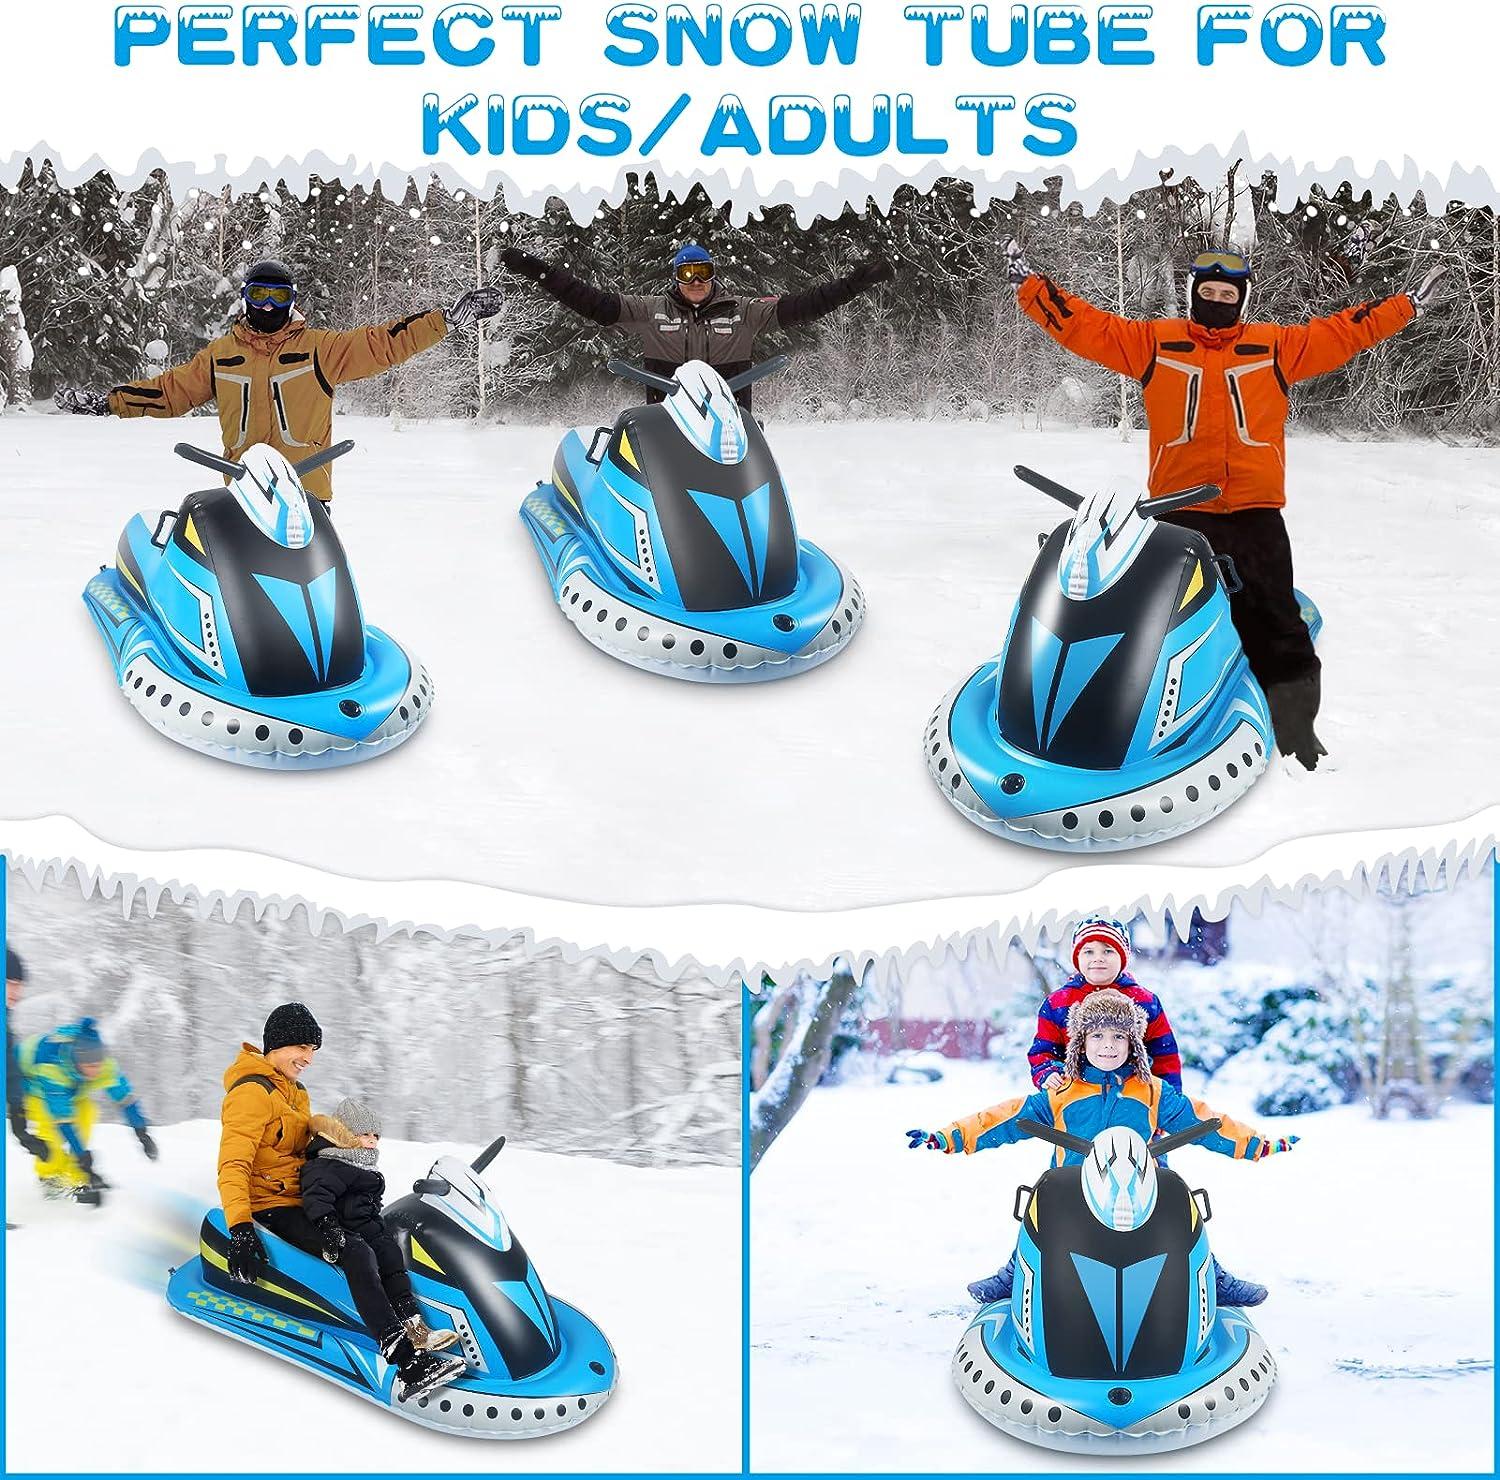 Inflatable Snow Sled, Heavy Duty Snow Tube with Reinforced Handles, Winter  Toys